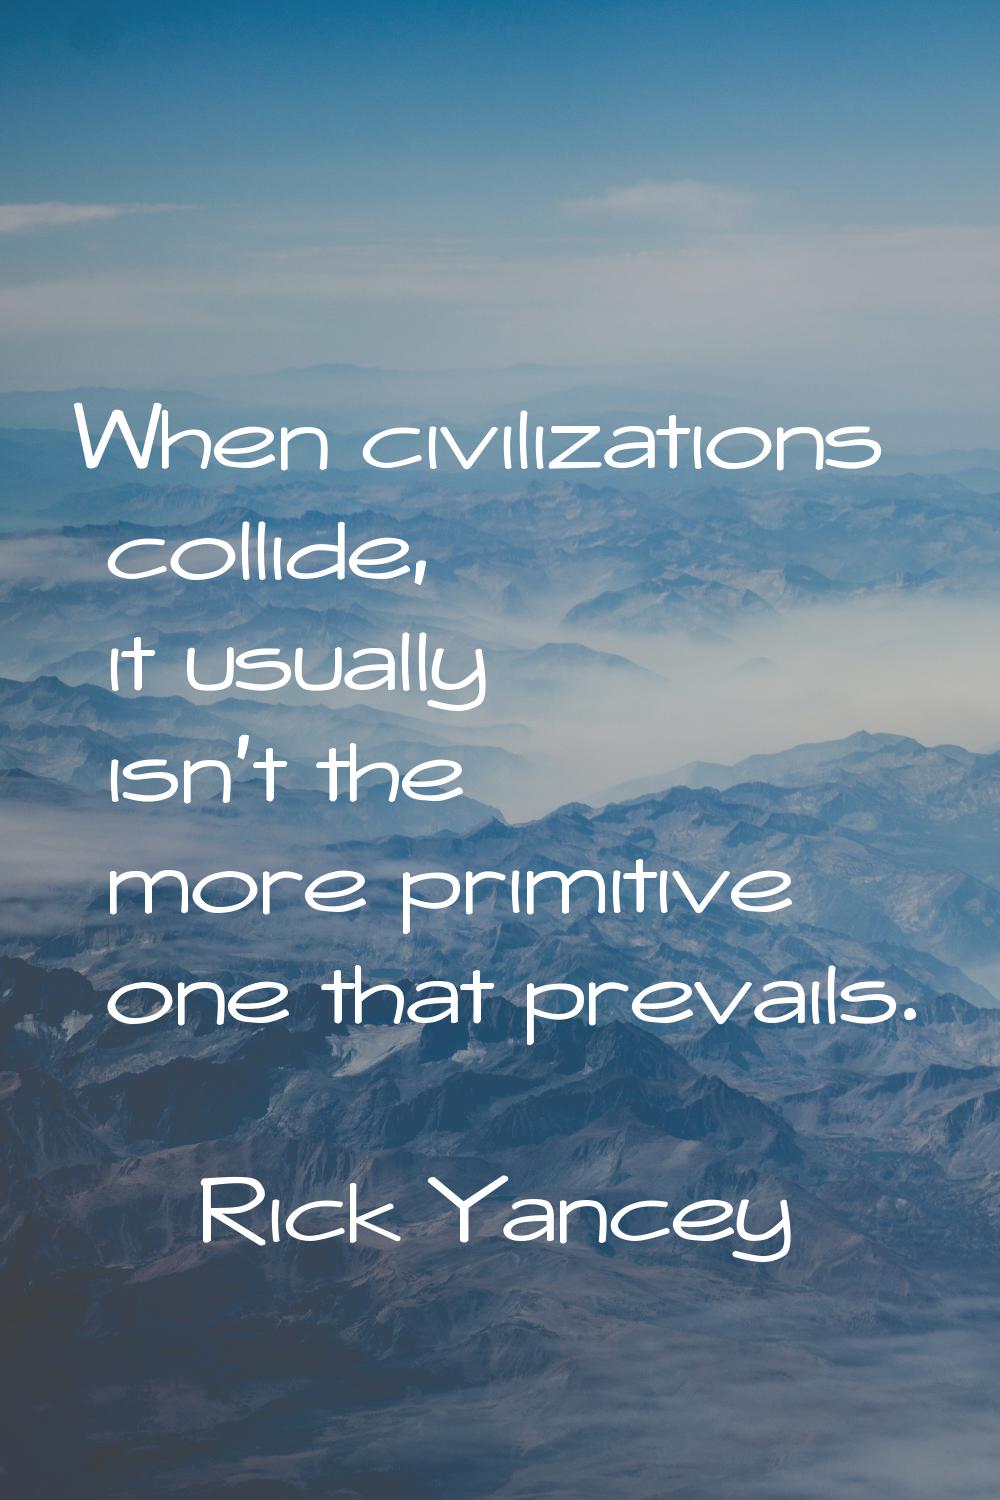 When civilizations collide, it usually isn't the more primitive one that prevails.